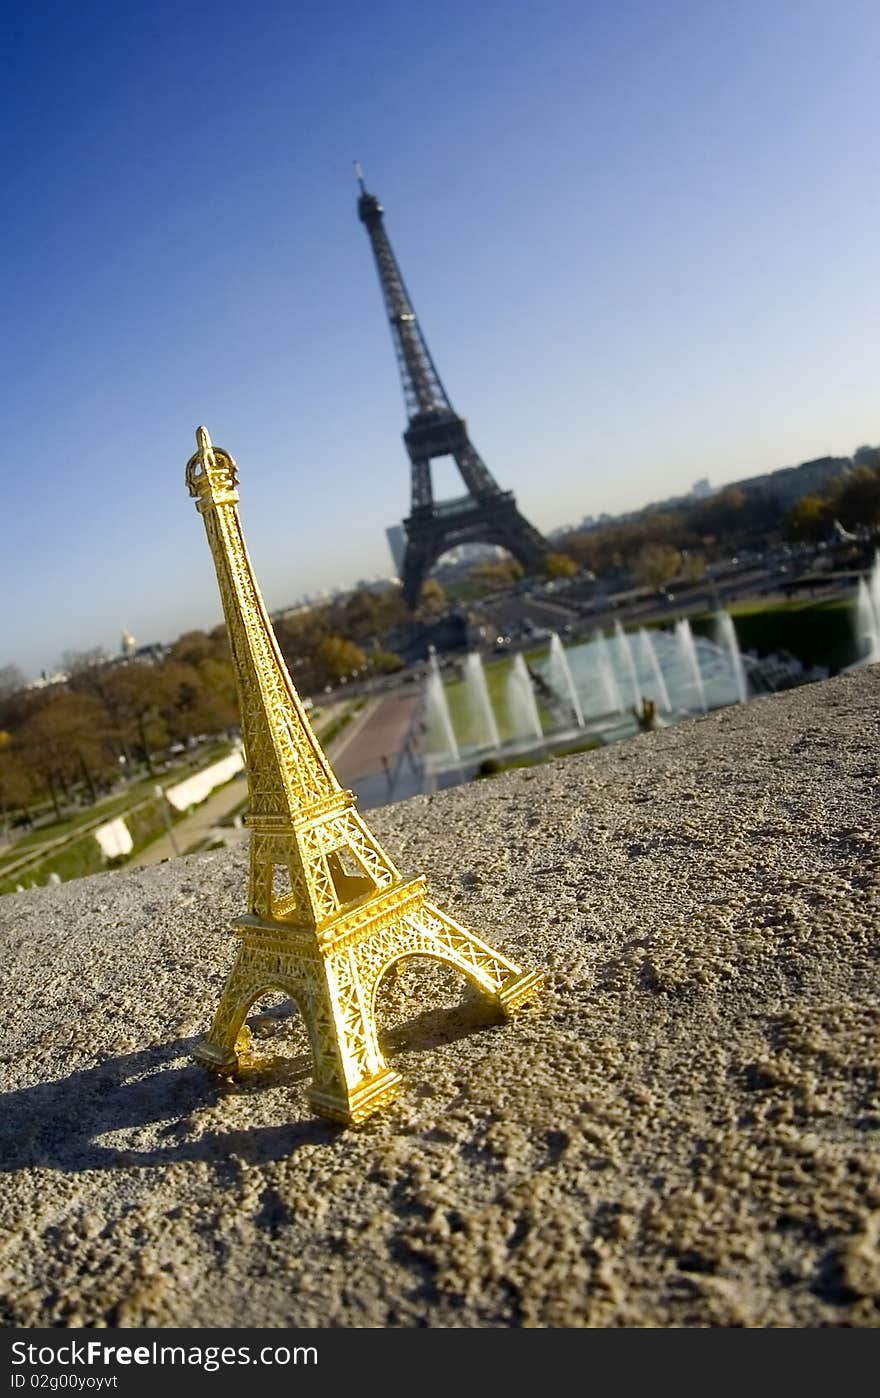 Eiffel tower miniature in front of real eiffel tower - Paris. Eiffel tower miniature in front of real eiffel tower - Paris